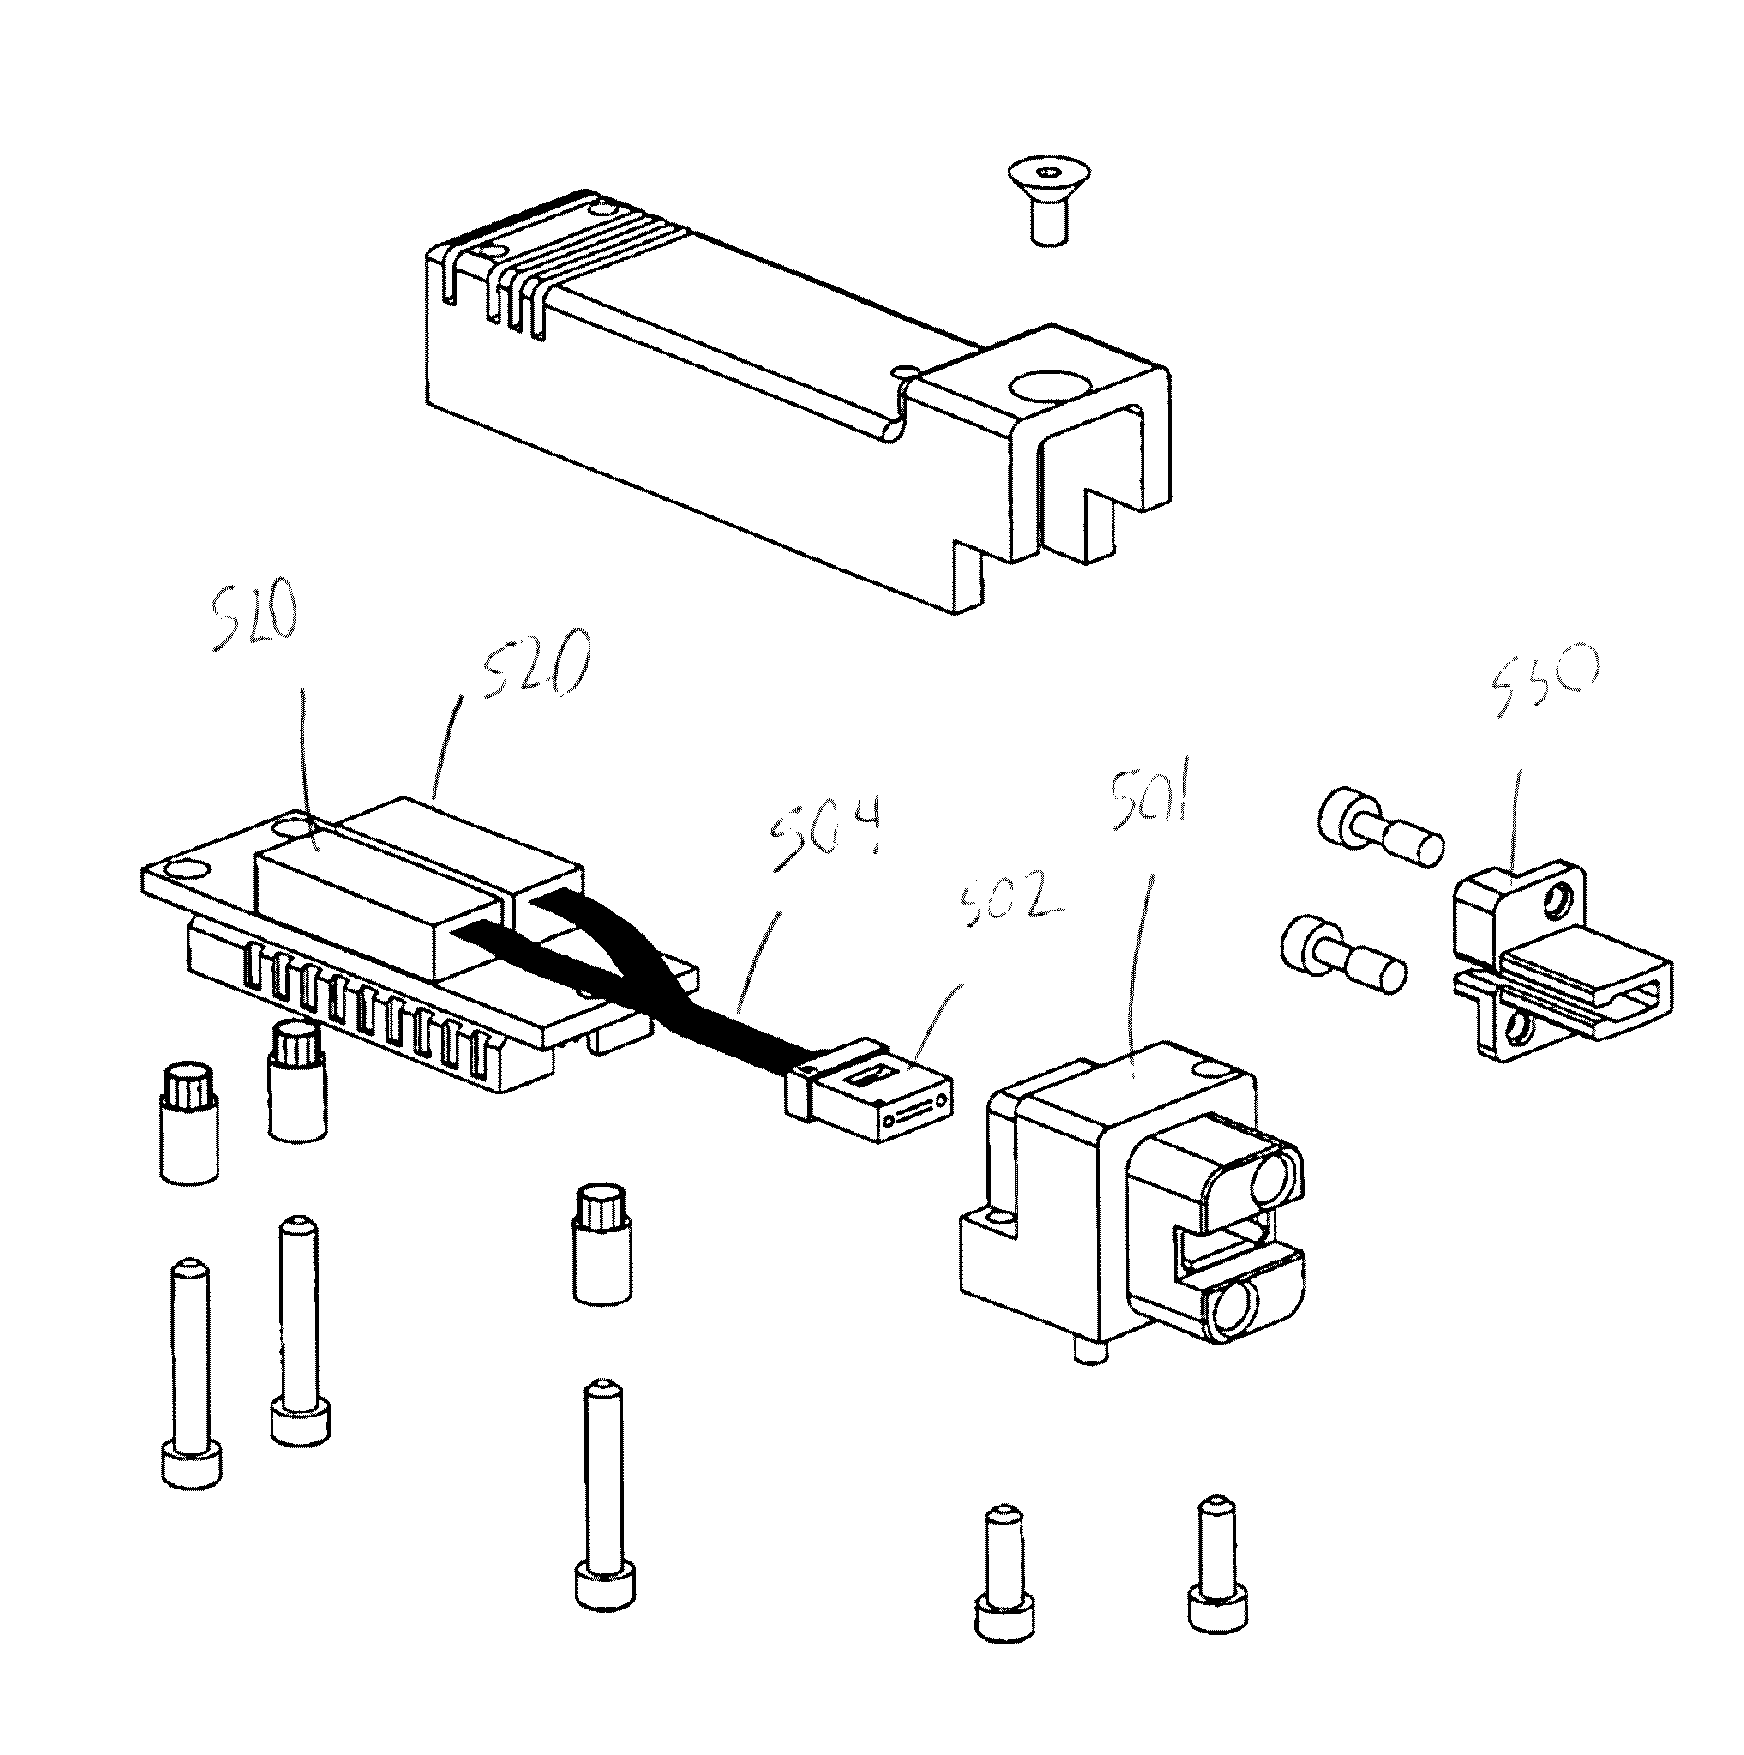 Opto-electric module for backplane connector